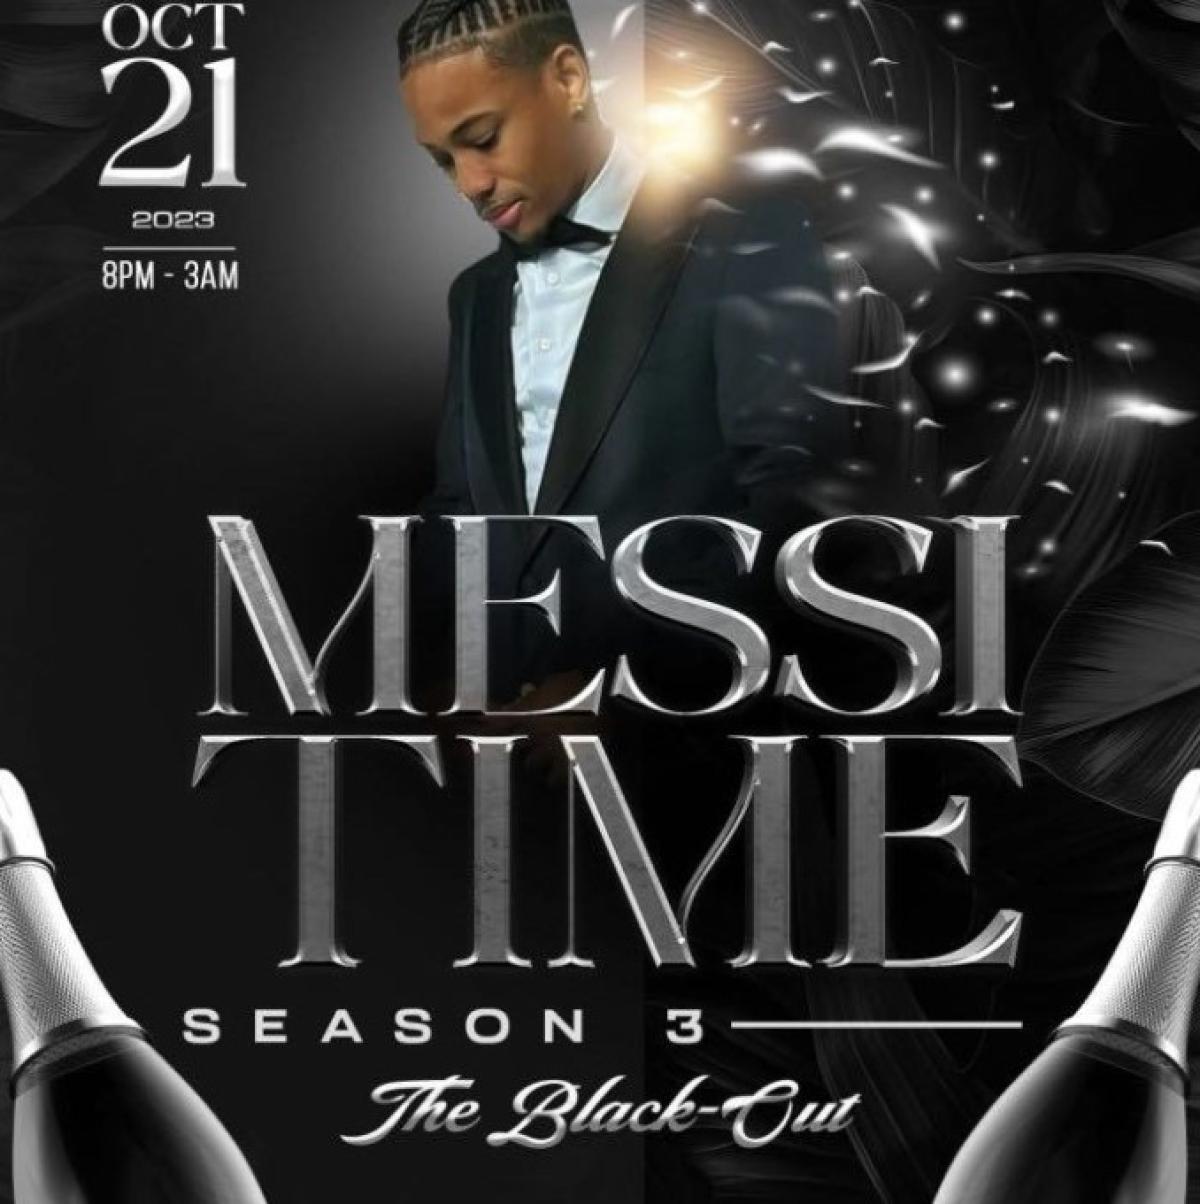 Messitime Season 3 flyer or graphic.